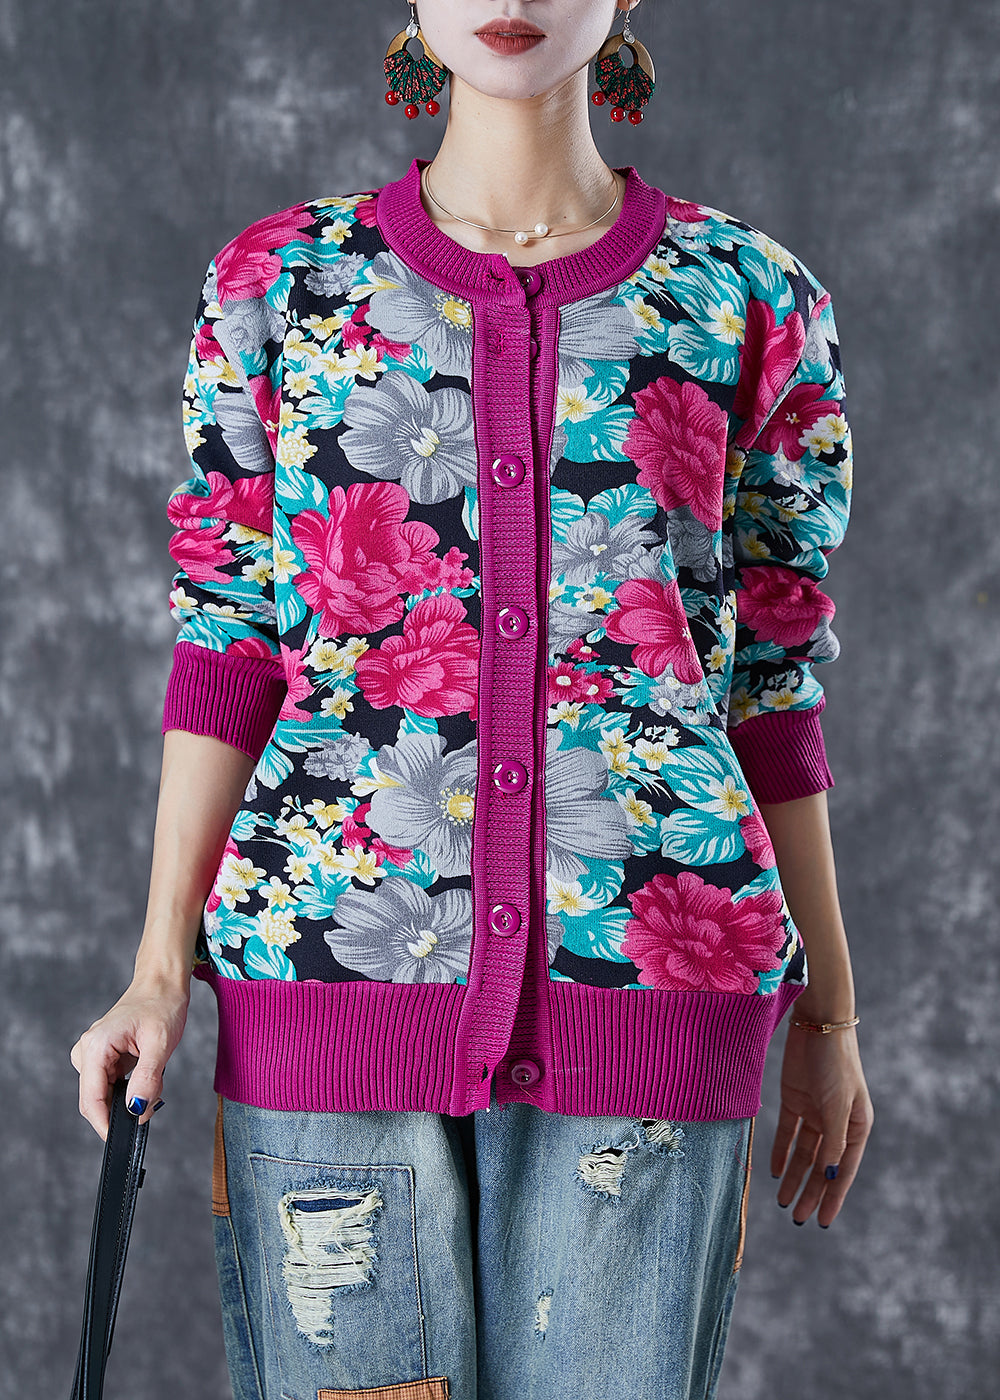 Art Rose Floral Print Thick Knit Sweaters Winter